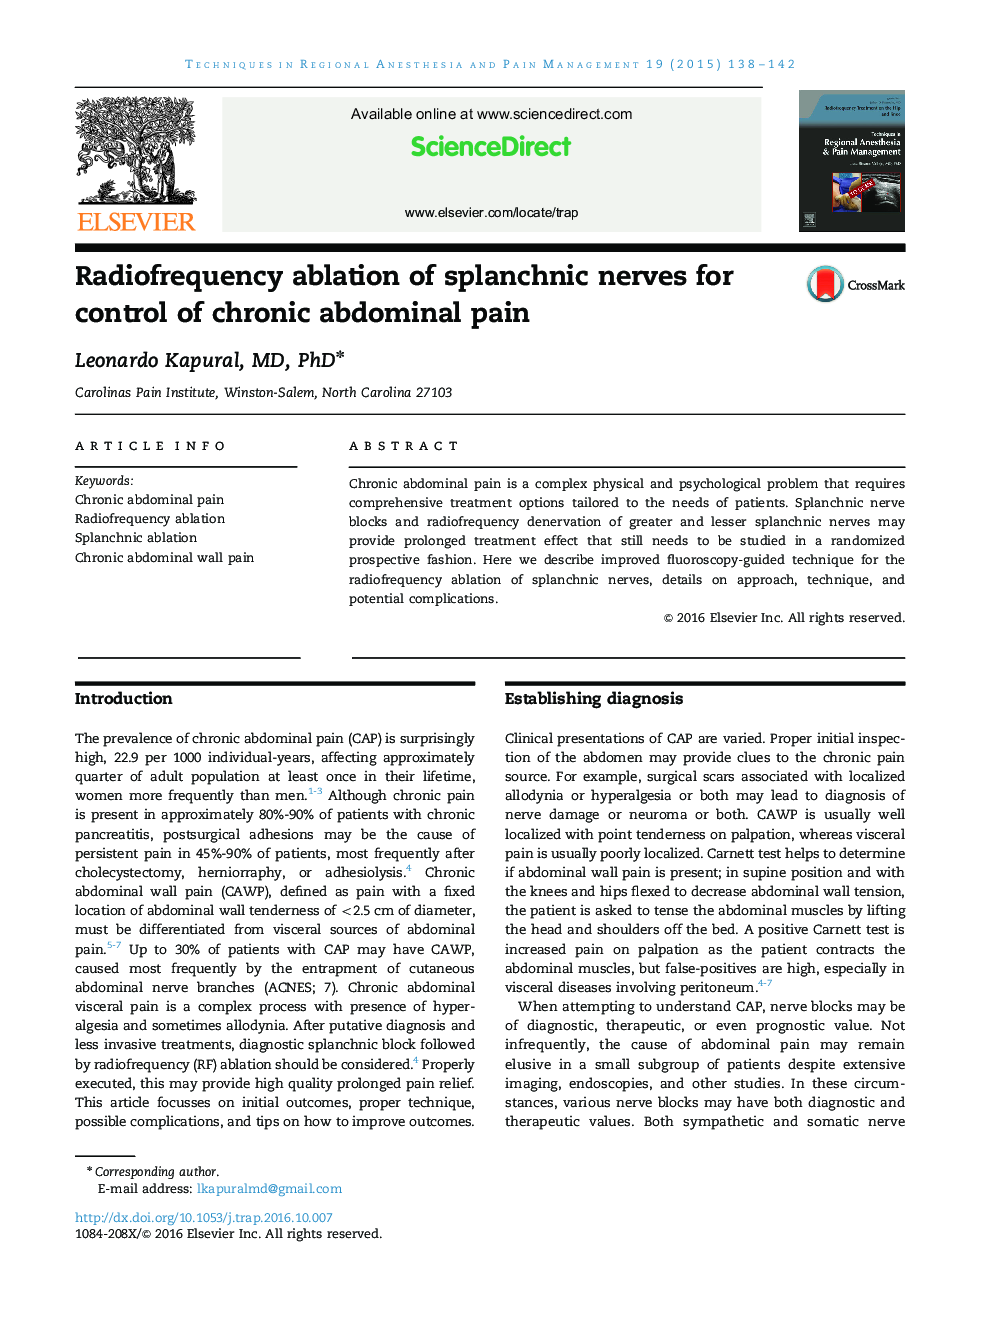 Radiofrequency ablation of splanchnic nerves for control of chronic abdominal pain